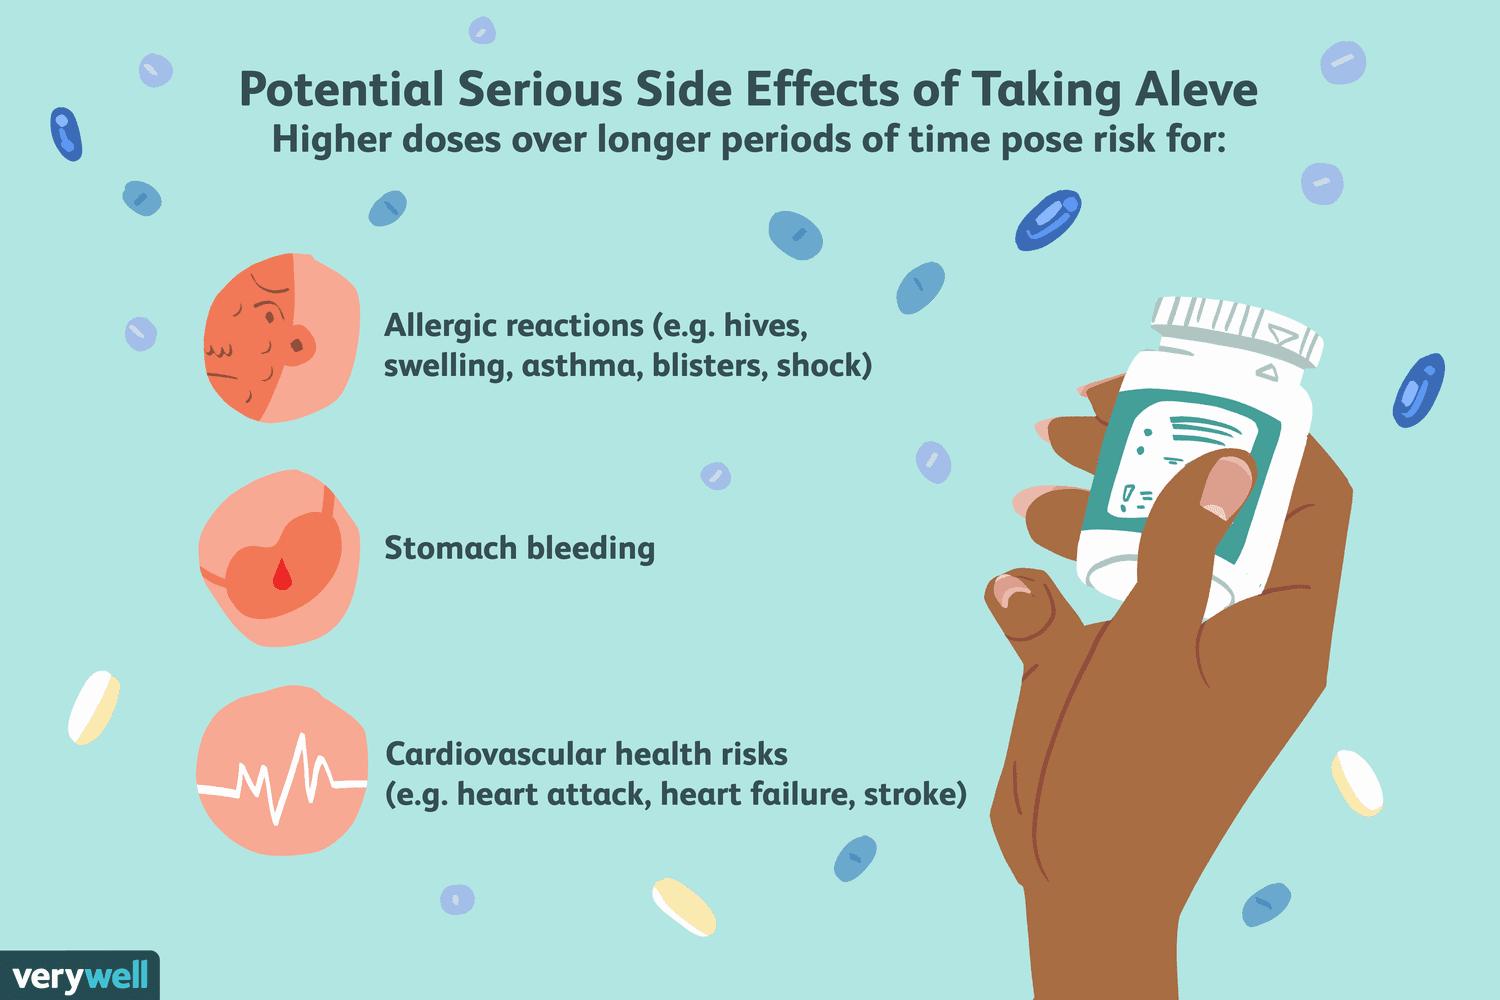 Potential serious side effects of taking Aleve include allergic reactions, stomach bleeding, and cardiovascular health risks.